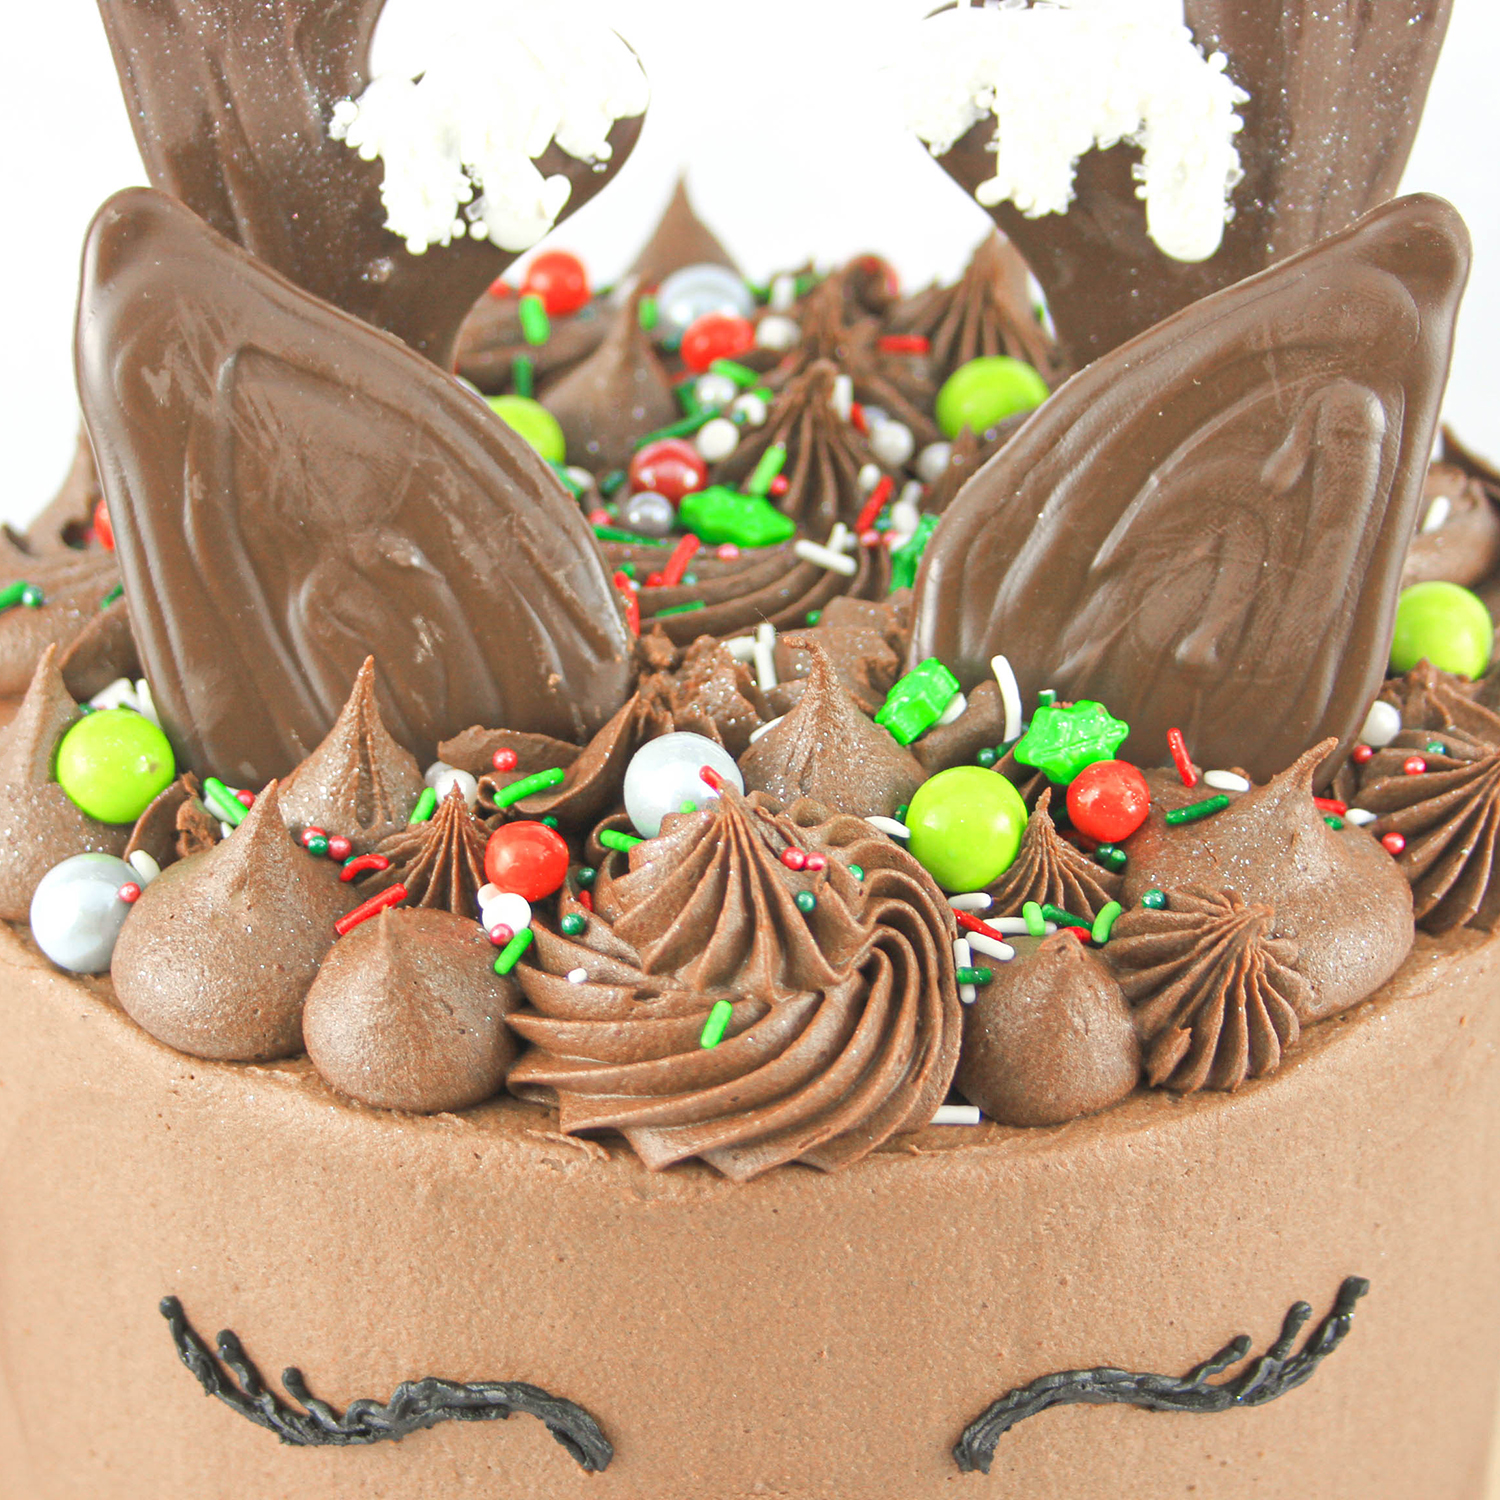 Chocolate Reindeer cake with snow covered chocolate antlers, chocolate ears, chocolate buttercream crown of swirls and dollops and sprinkles, black buttercream eyelashes and a red chocolate sparkling nose.